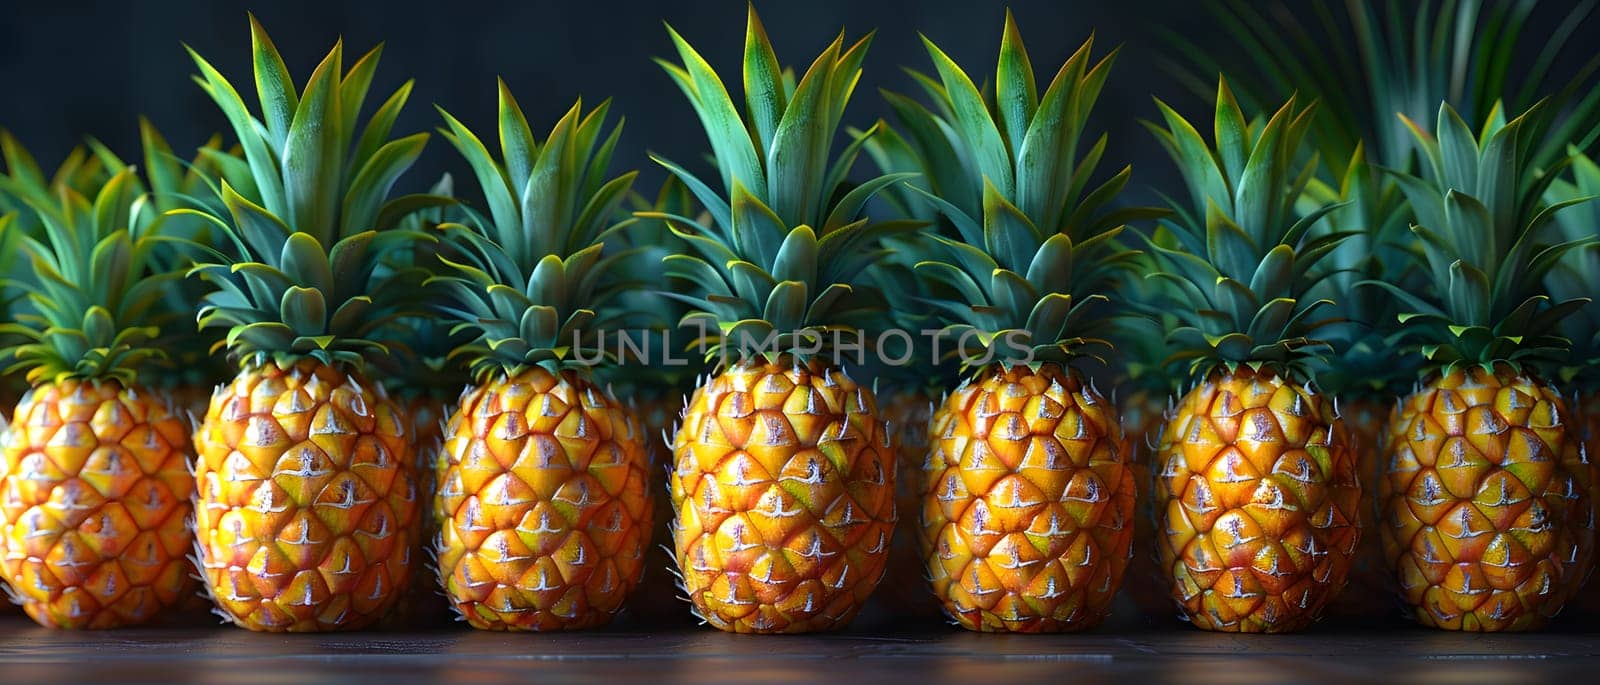 Ananas are terrestrial plants that produce pineapples, a delicious and nutritious fruit. These natural foods are lined up in a row on a wooden table